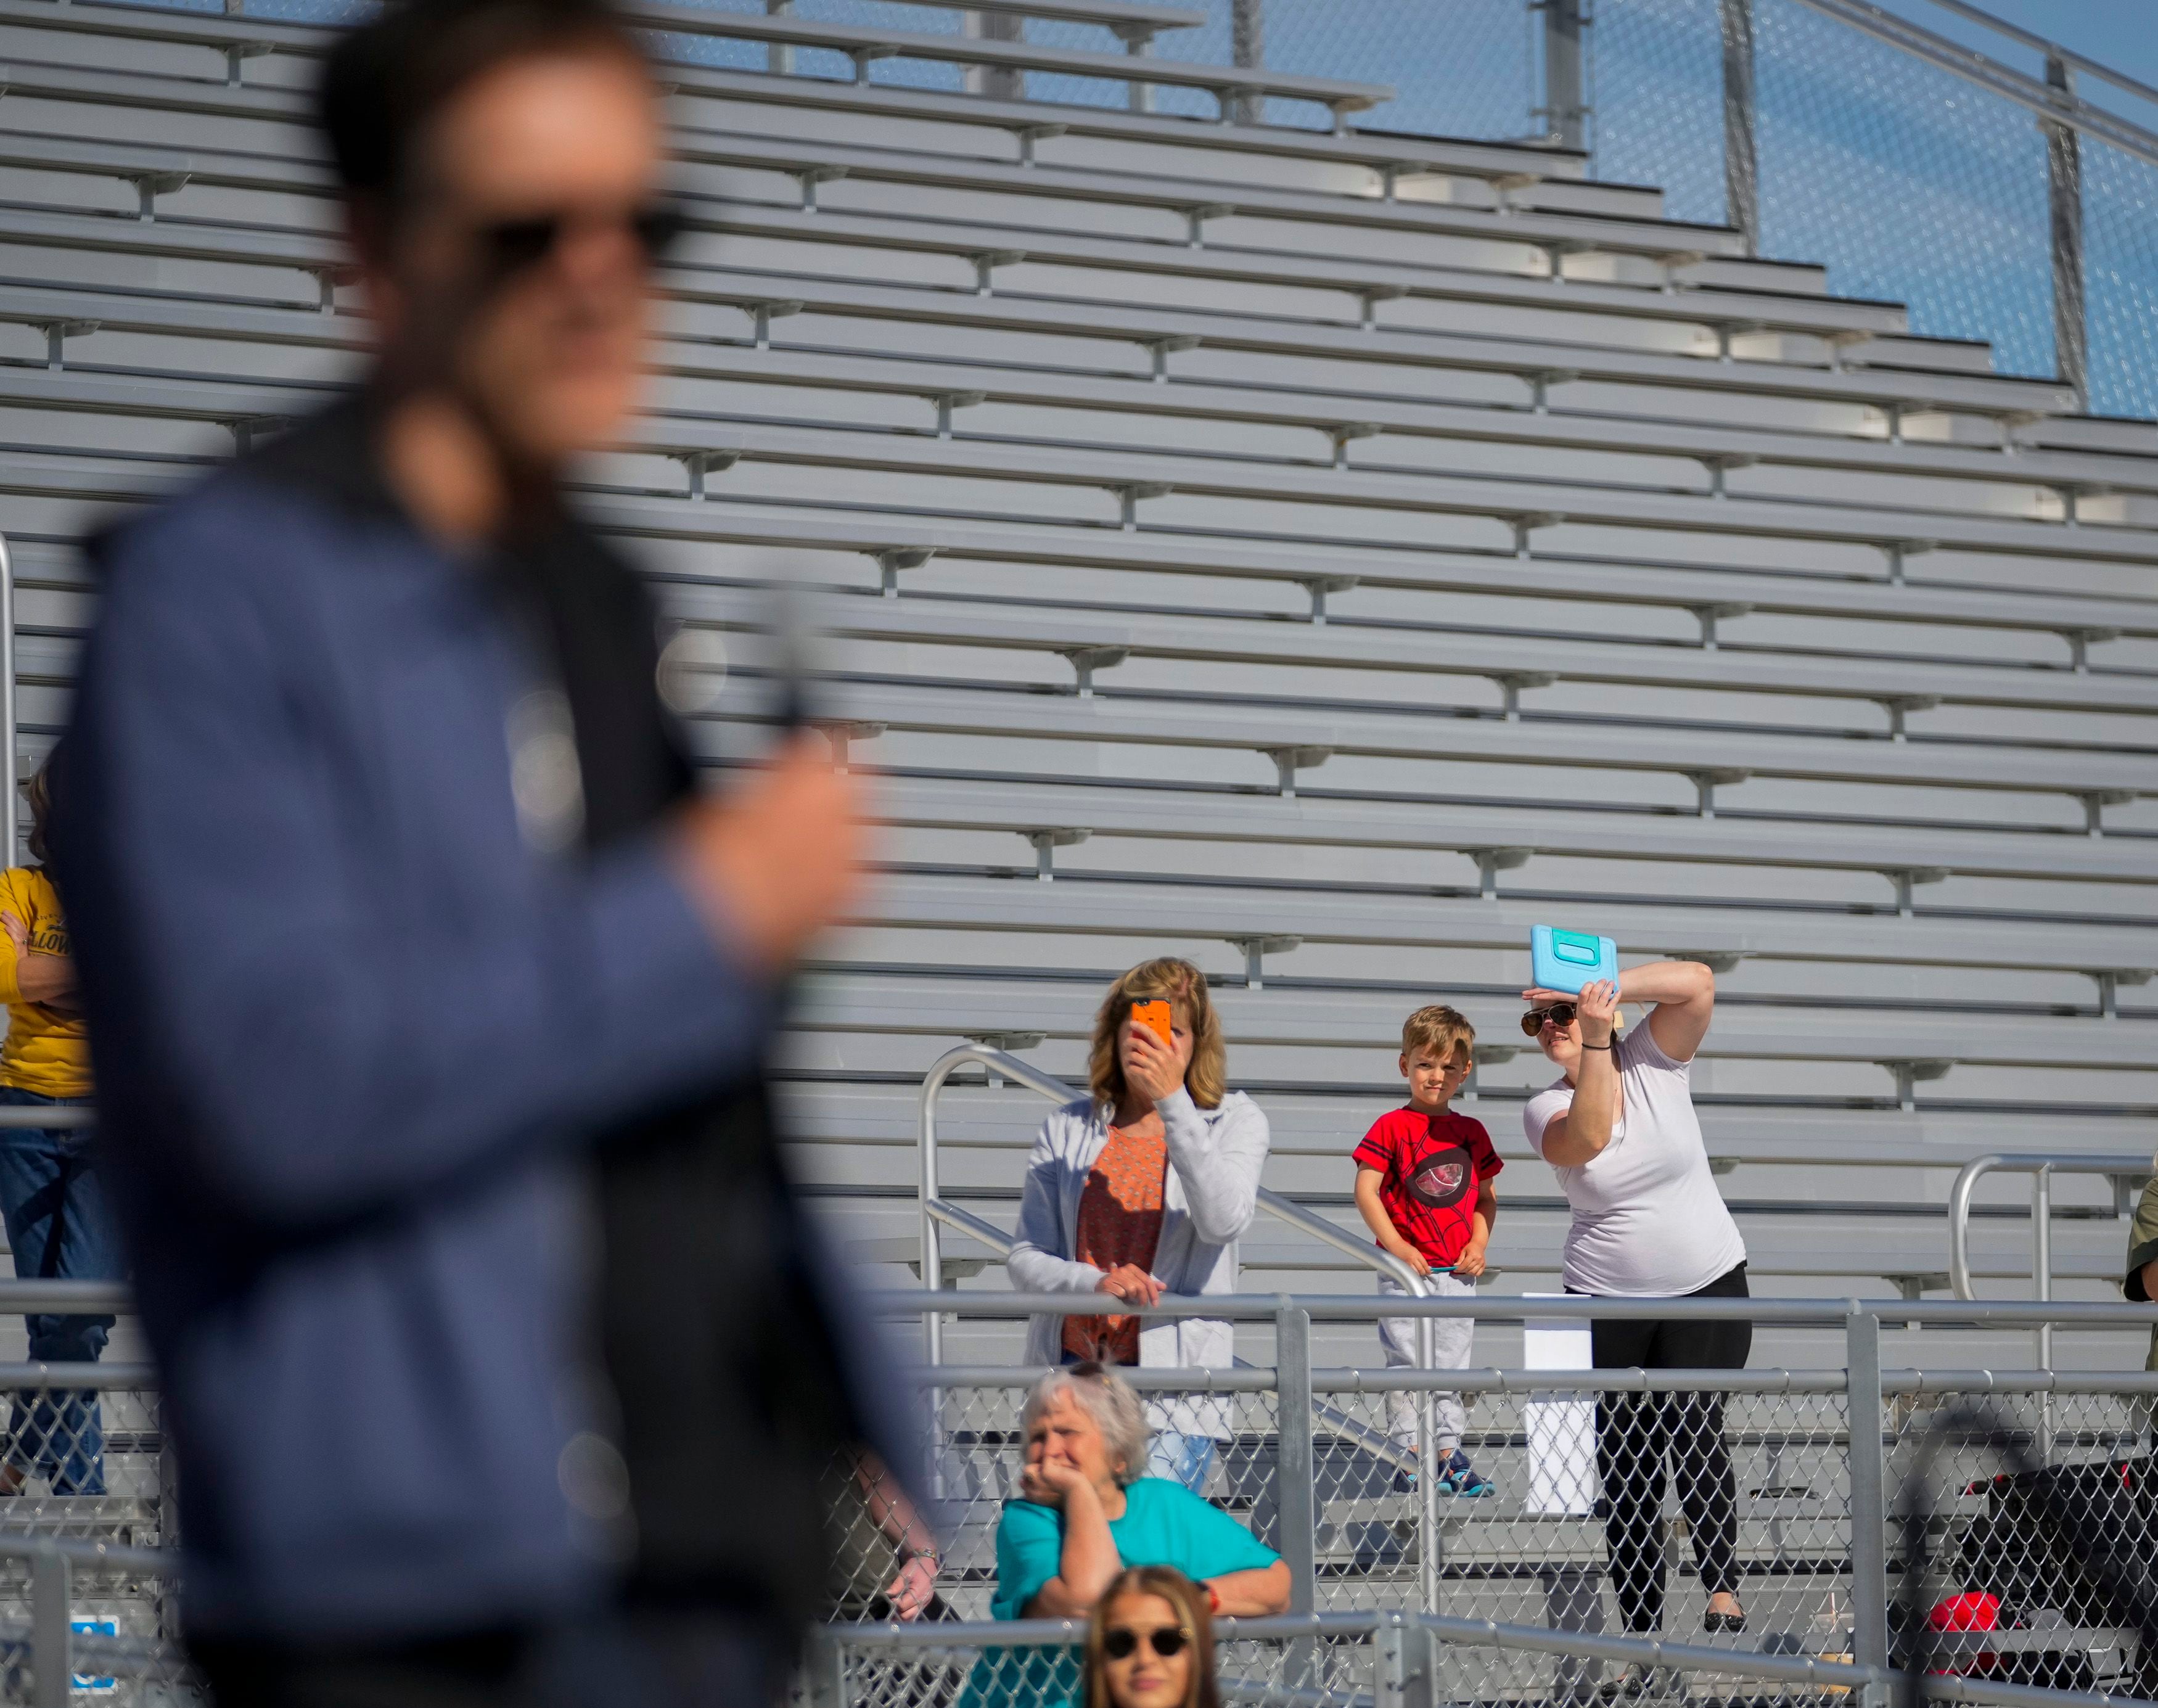 (Bethany Baker  |  The Salt Lake Tribune) People watch from the stands as Kevin Bacon speaks at a charity event to commemorate the 40th anniversary of the movie "Footloose" on the football field of Payson High School in Payson on Saturday, April 20, 2024.